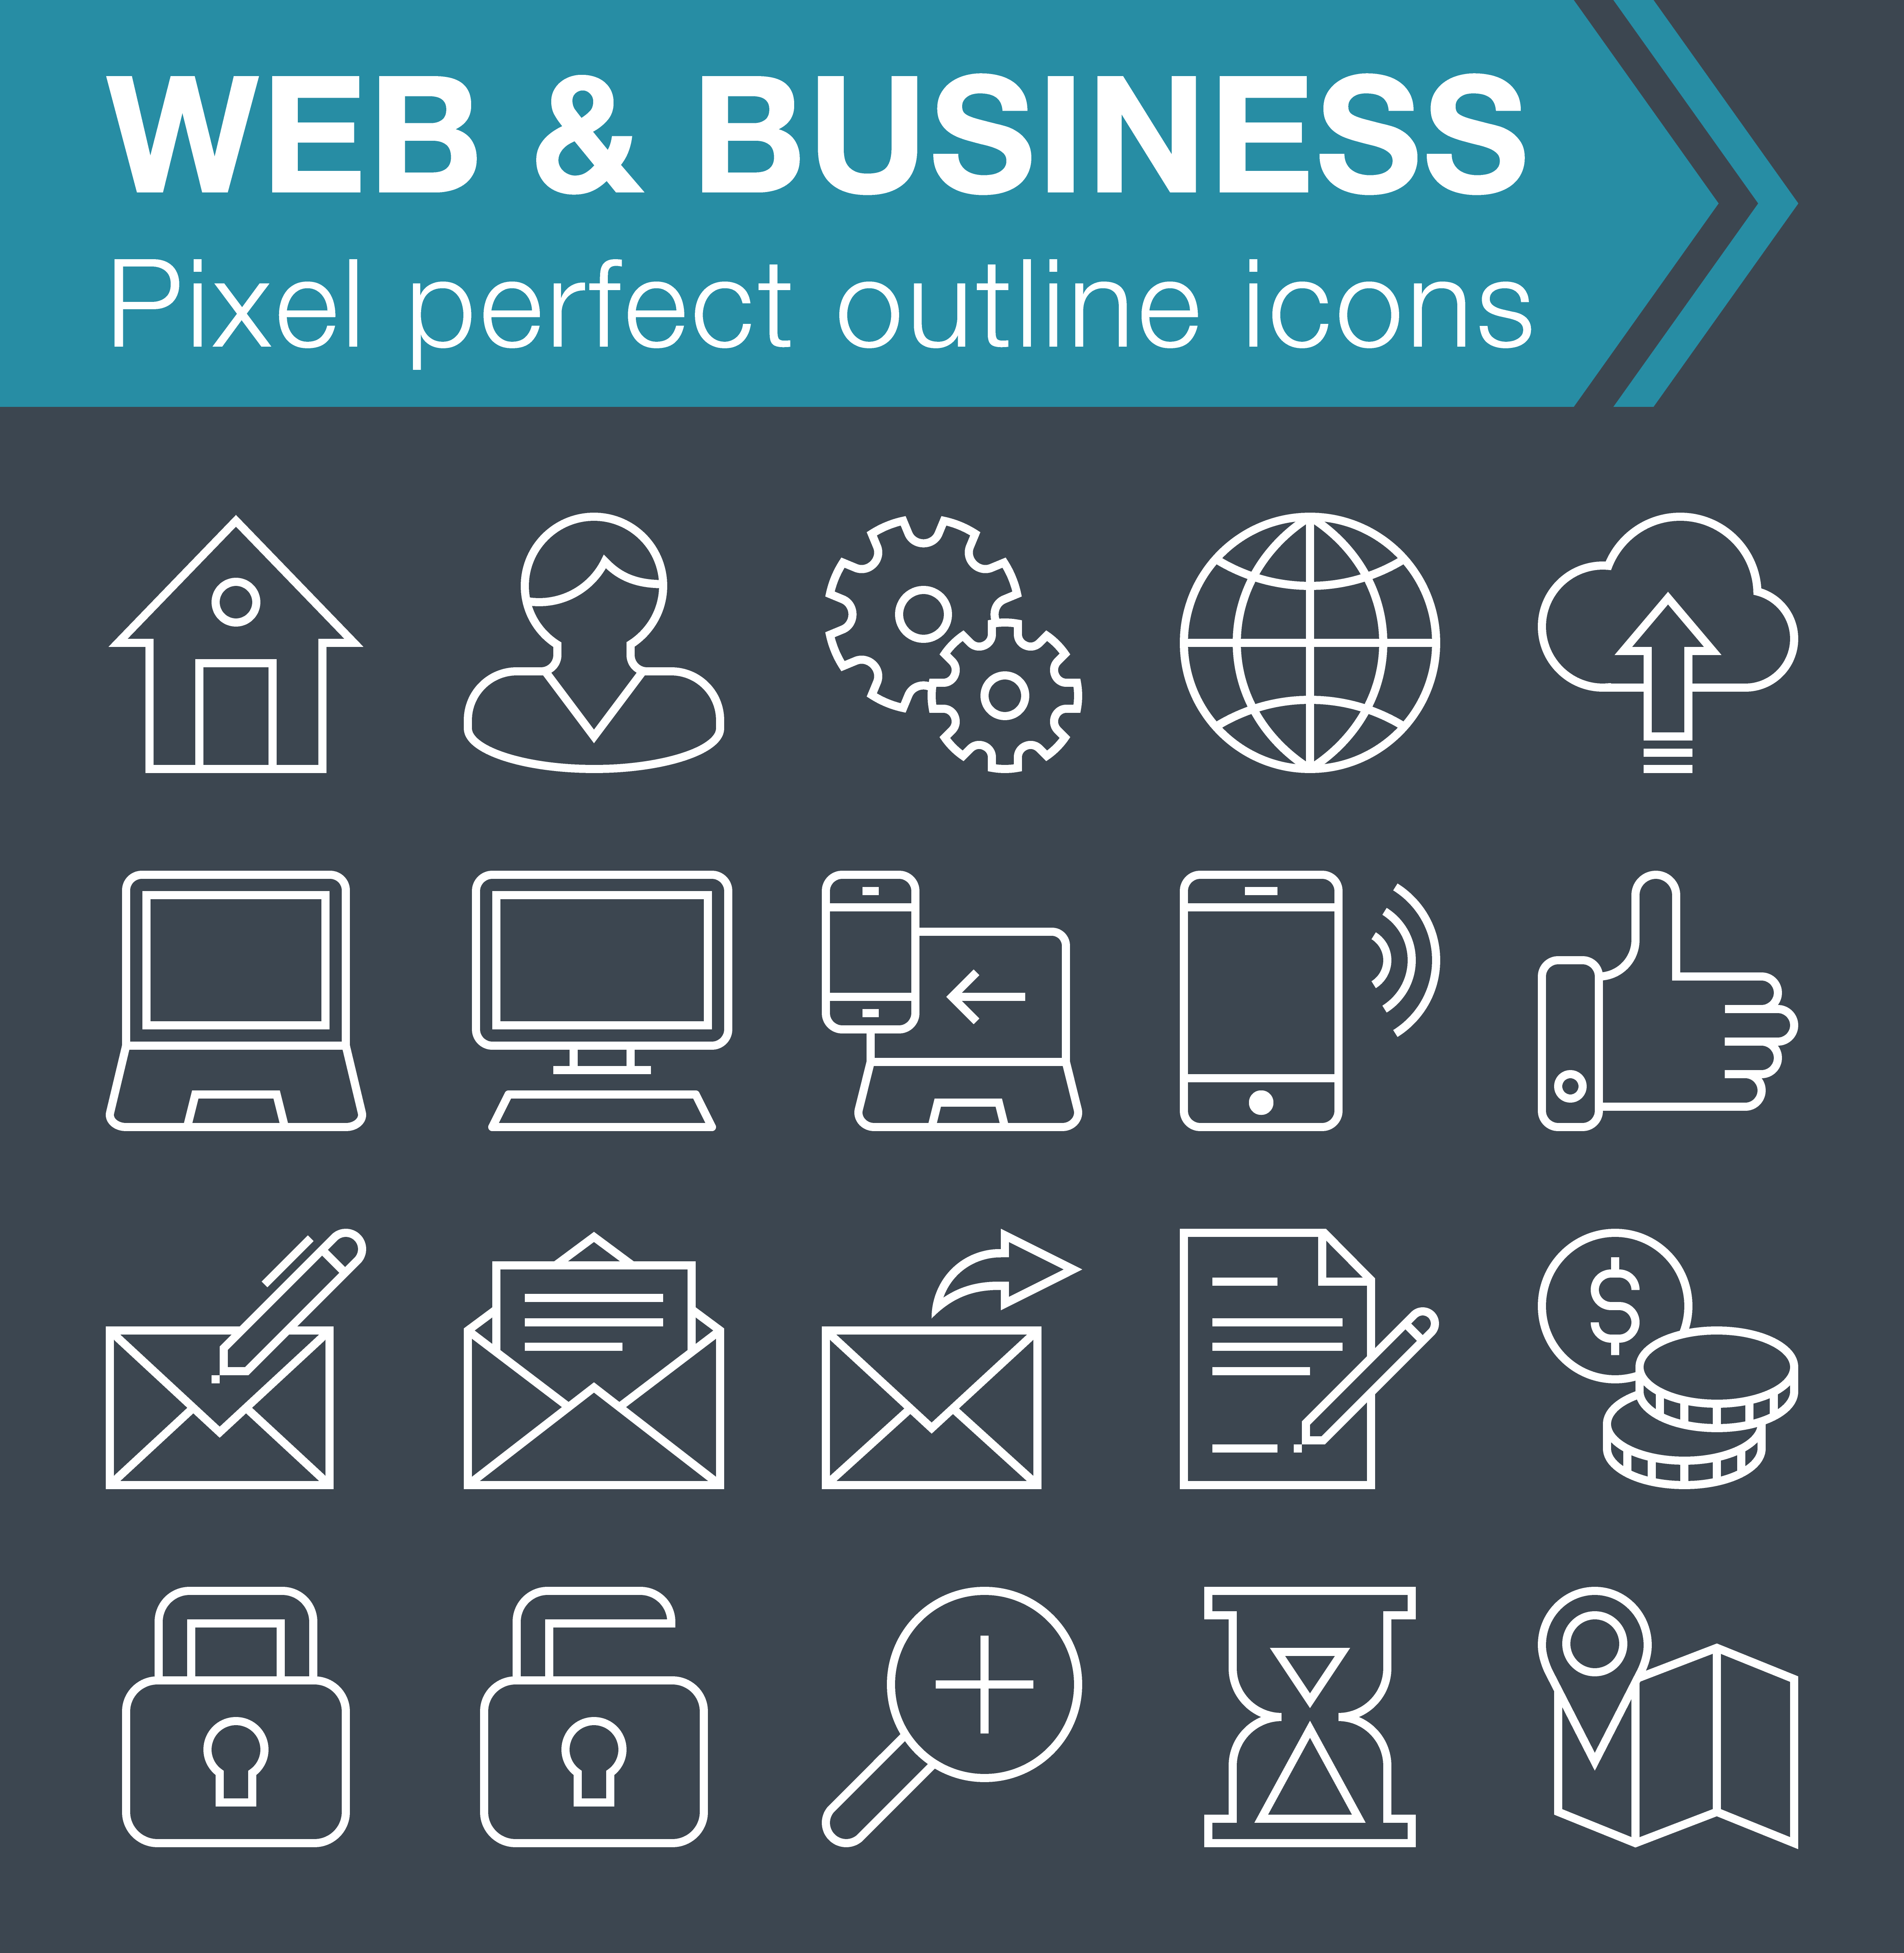 Web and Business outline icons set